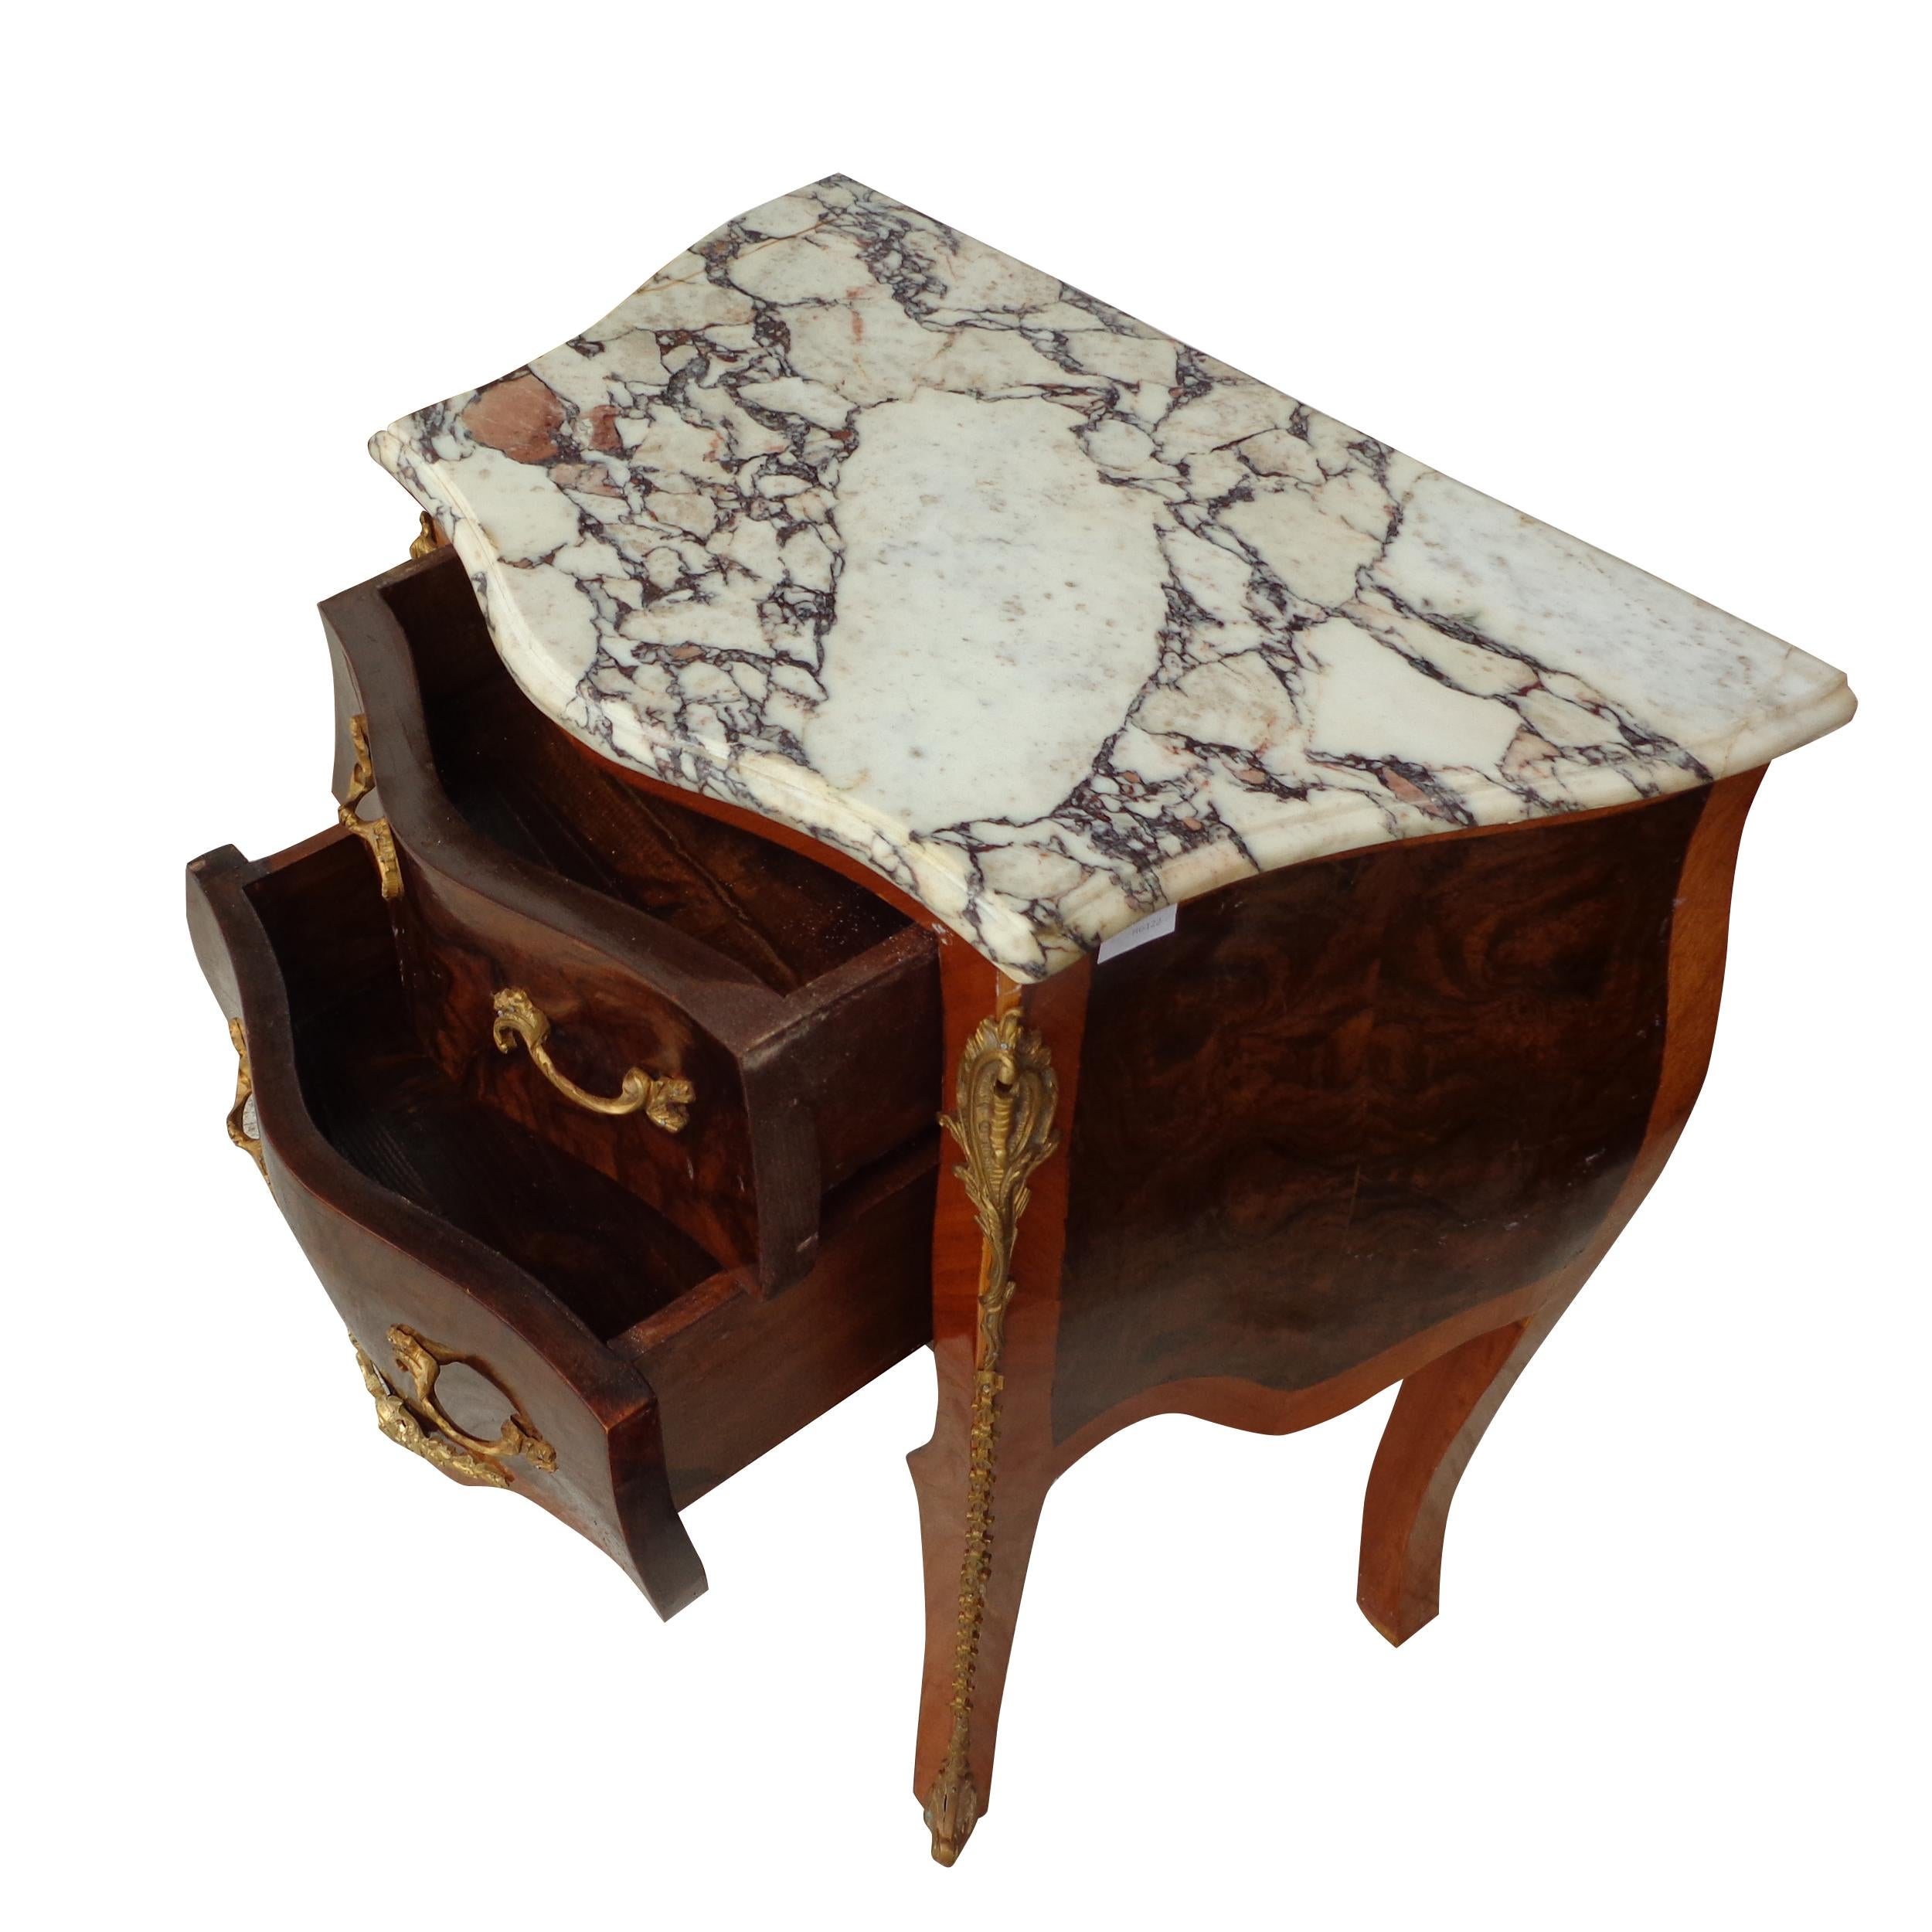 Pair of French Louis VI Style Commode Nightstands with Marble Tops

A pair of 2 drawer French commodes with parquetry inlays and beautiful bronze ormolu with  tops in calcutta marble. 
 